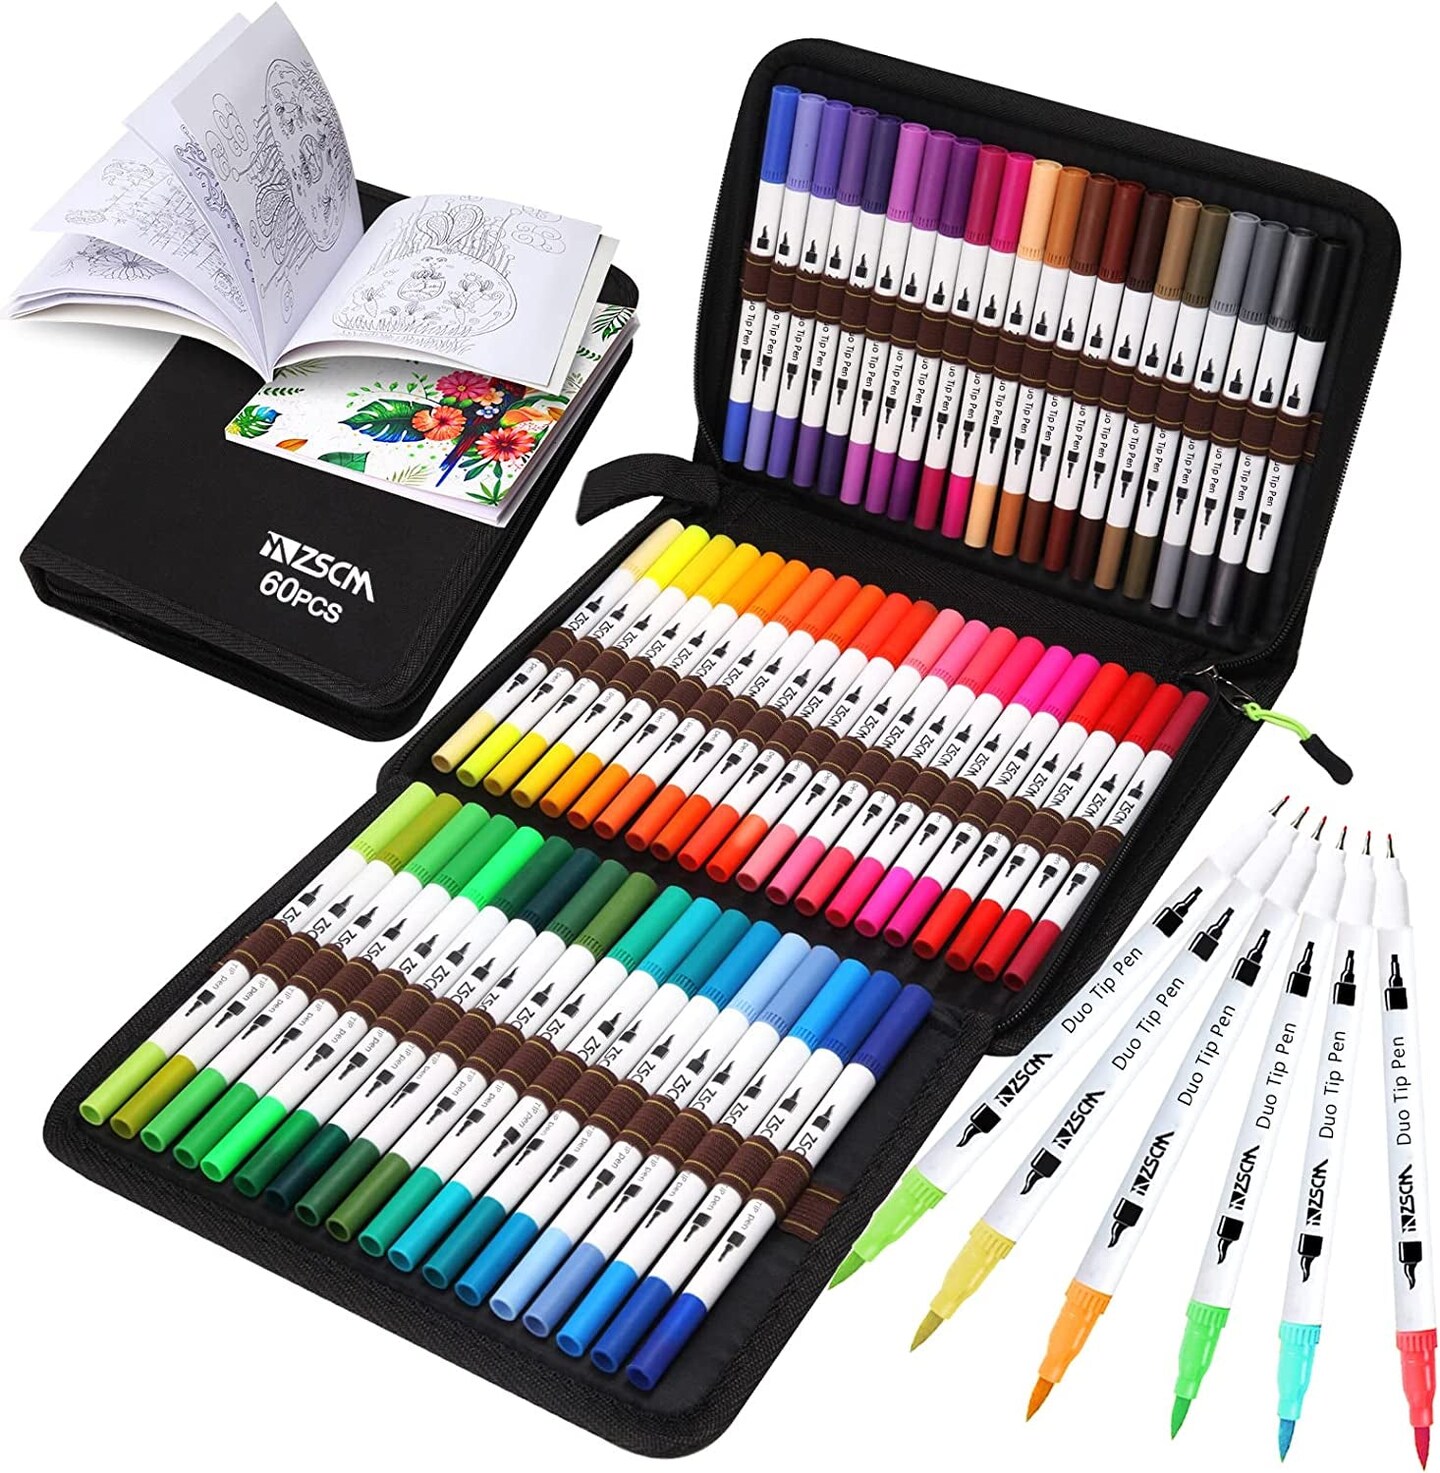 ZSCM Duo Tip Brush Coloring Pens,60 Colors Art Markers,Fine